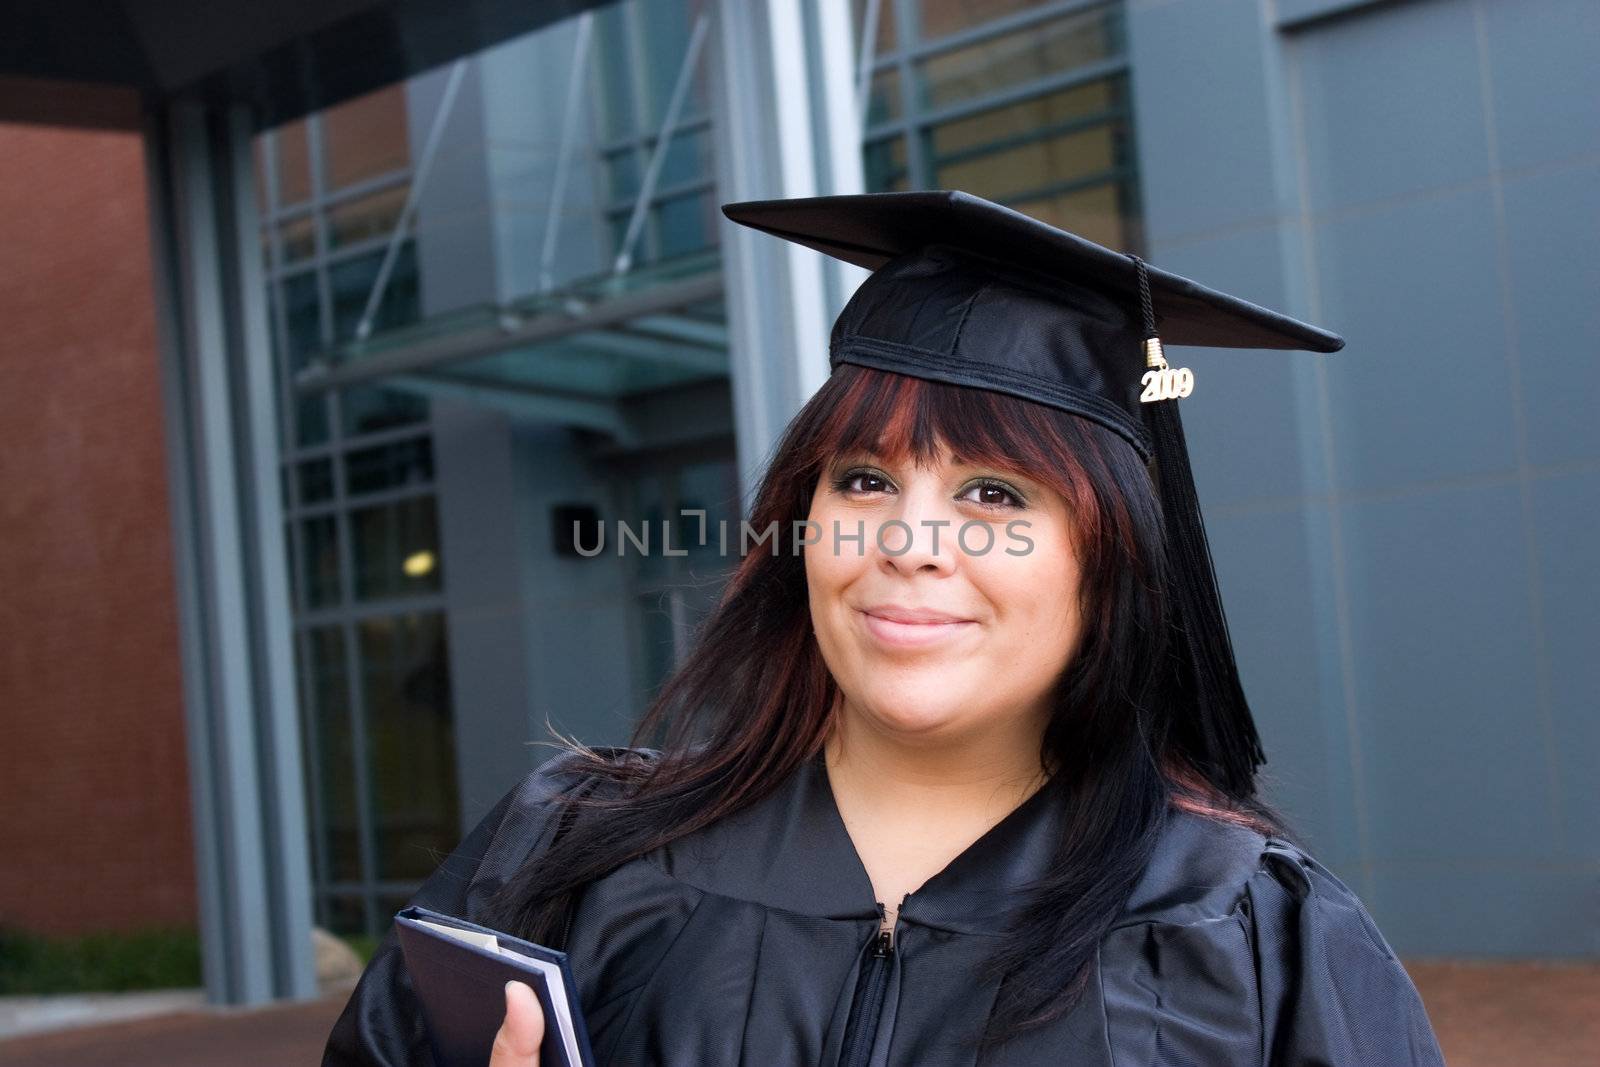 A recent graduate posing in her cap and gown and holding her fresh diploma or degree.